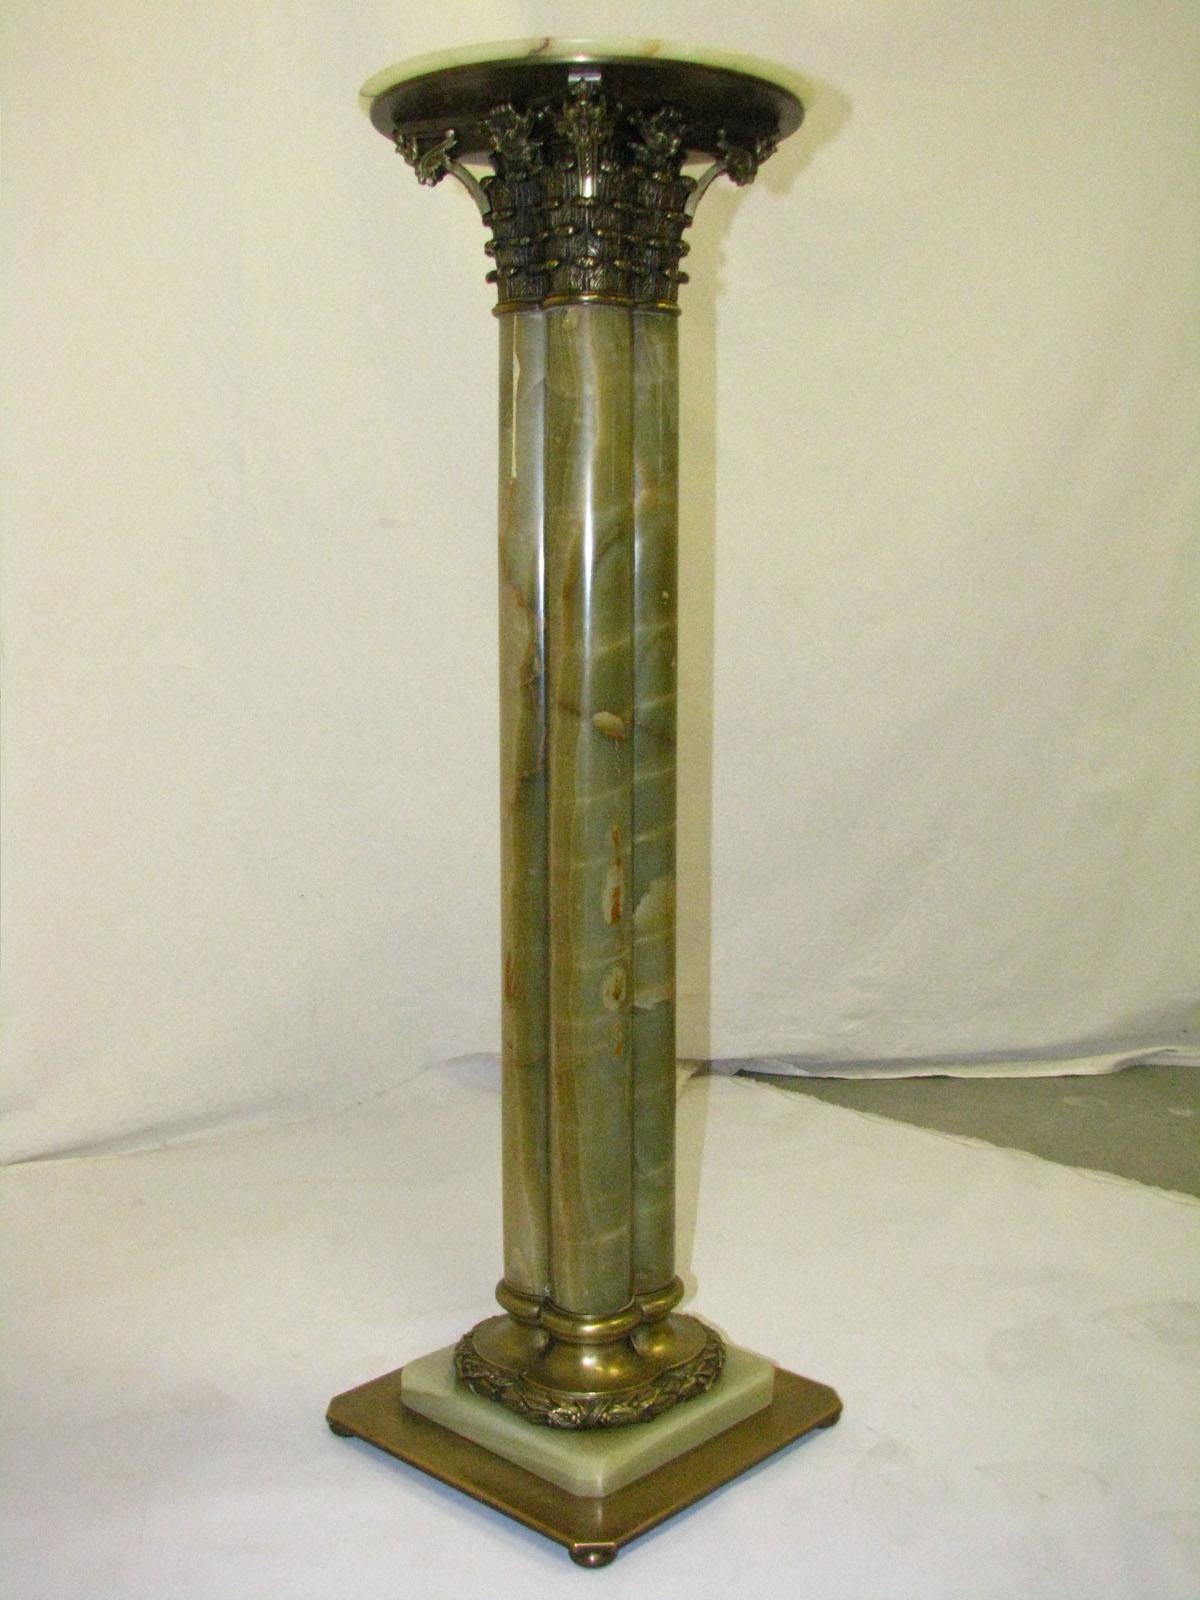 An unusual pedestal with an unusual height of almost one meter,
made of natural green onyx,
in the form of a column (consisting of 4 columns connected to each other with round smooth stems),
topped with a metal Corinthian and a stone